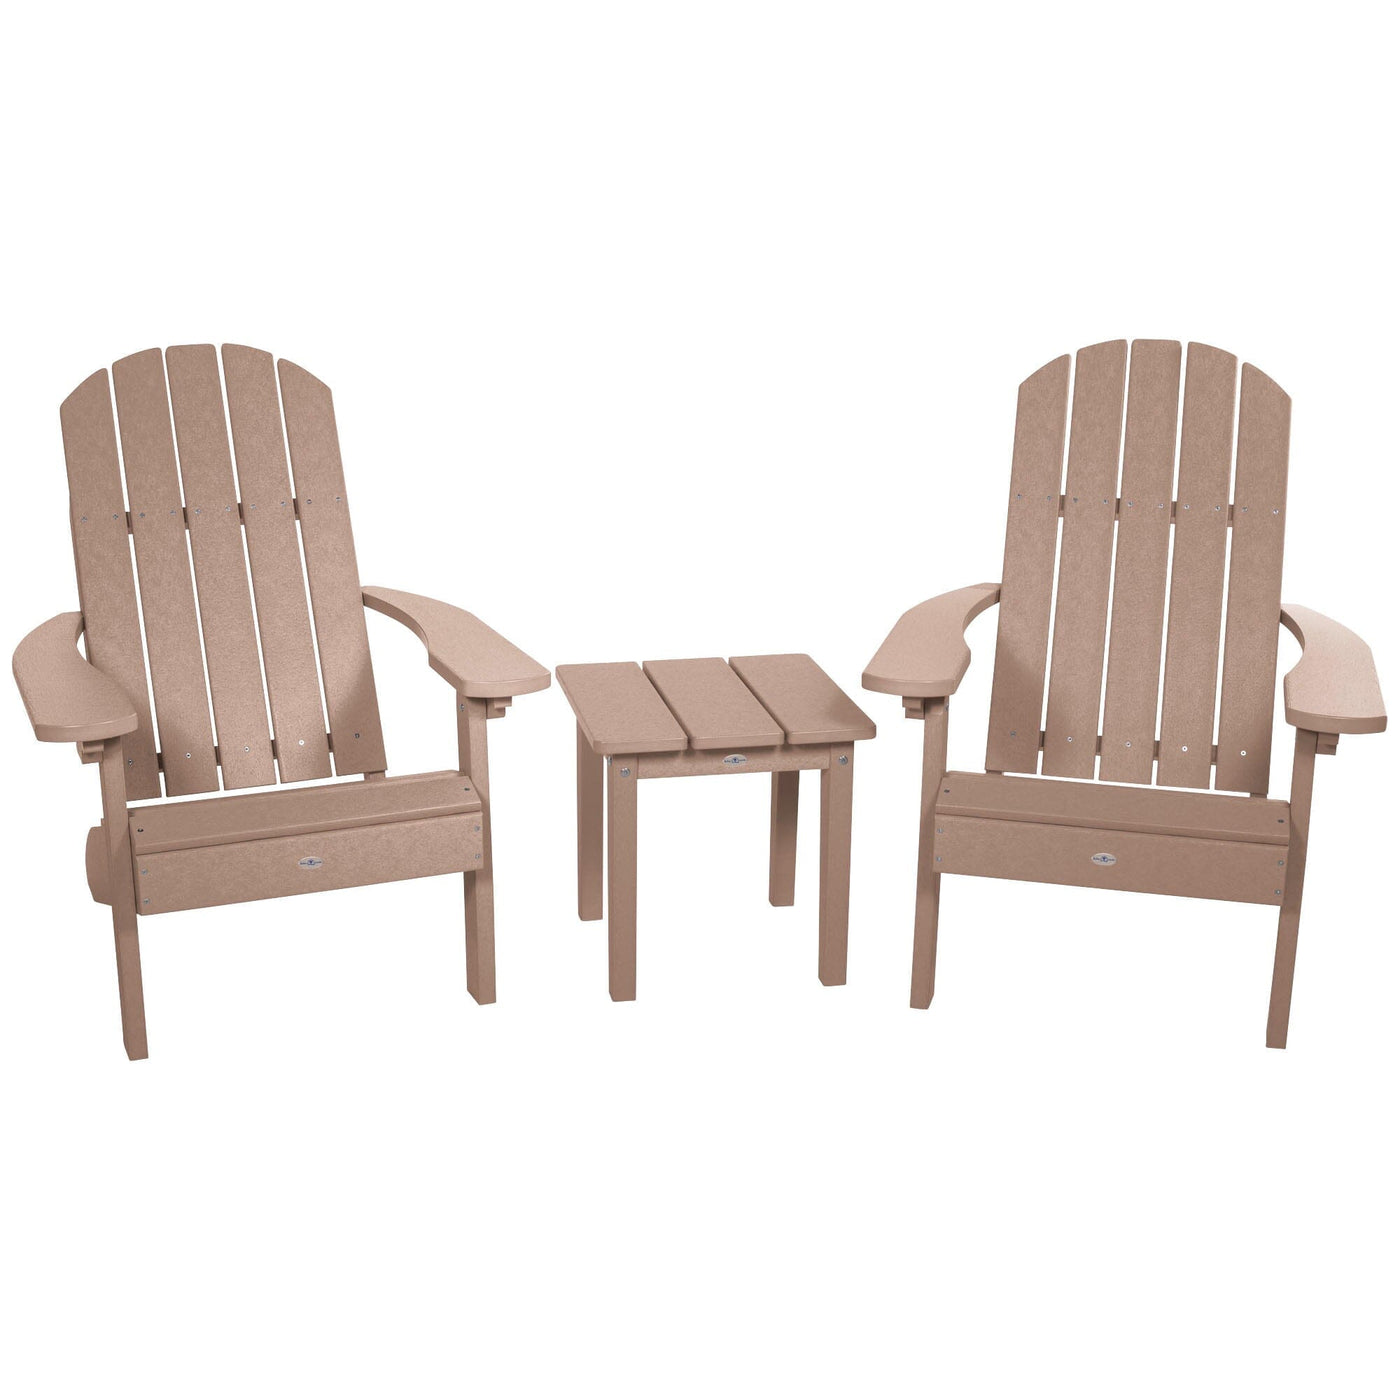 Two Cape Classic Adirondack Chairs and Side Table Set Kitted Set Bahia Verde Outdoors Cabana Tan 